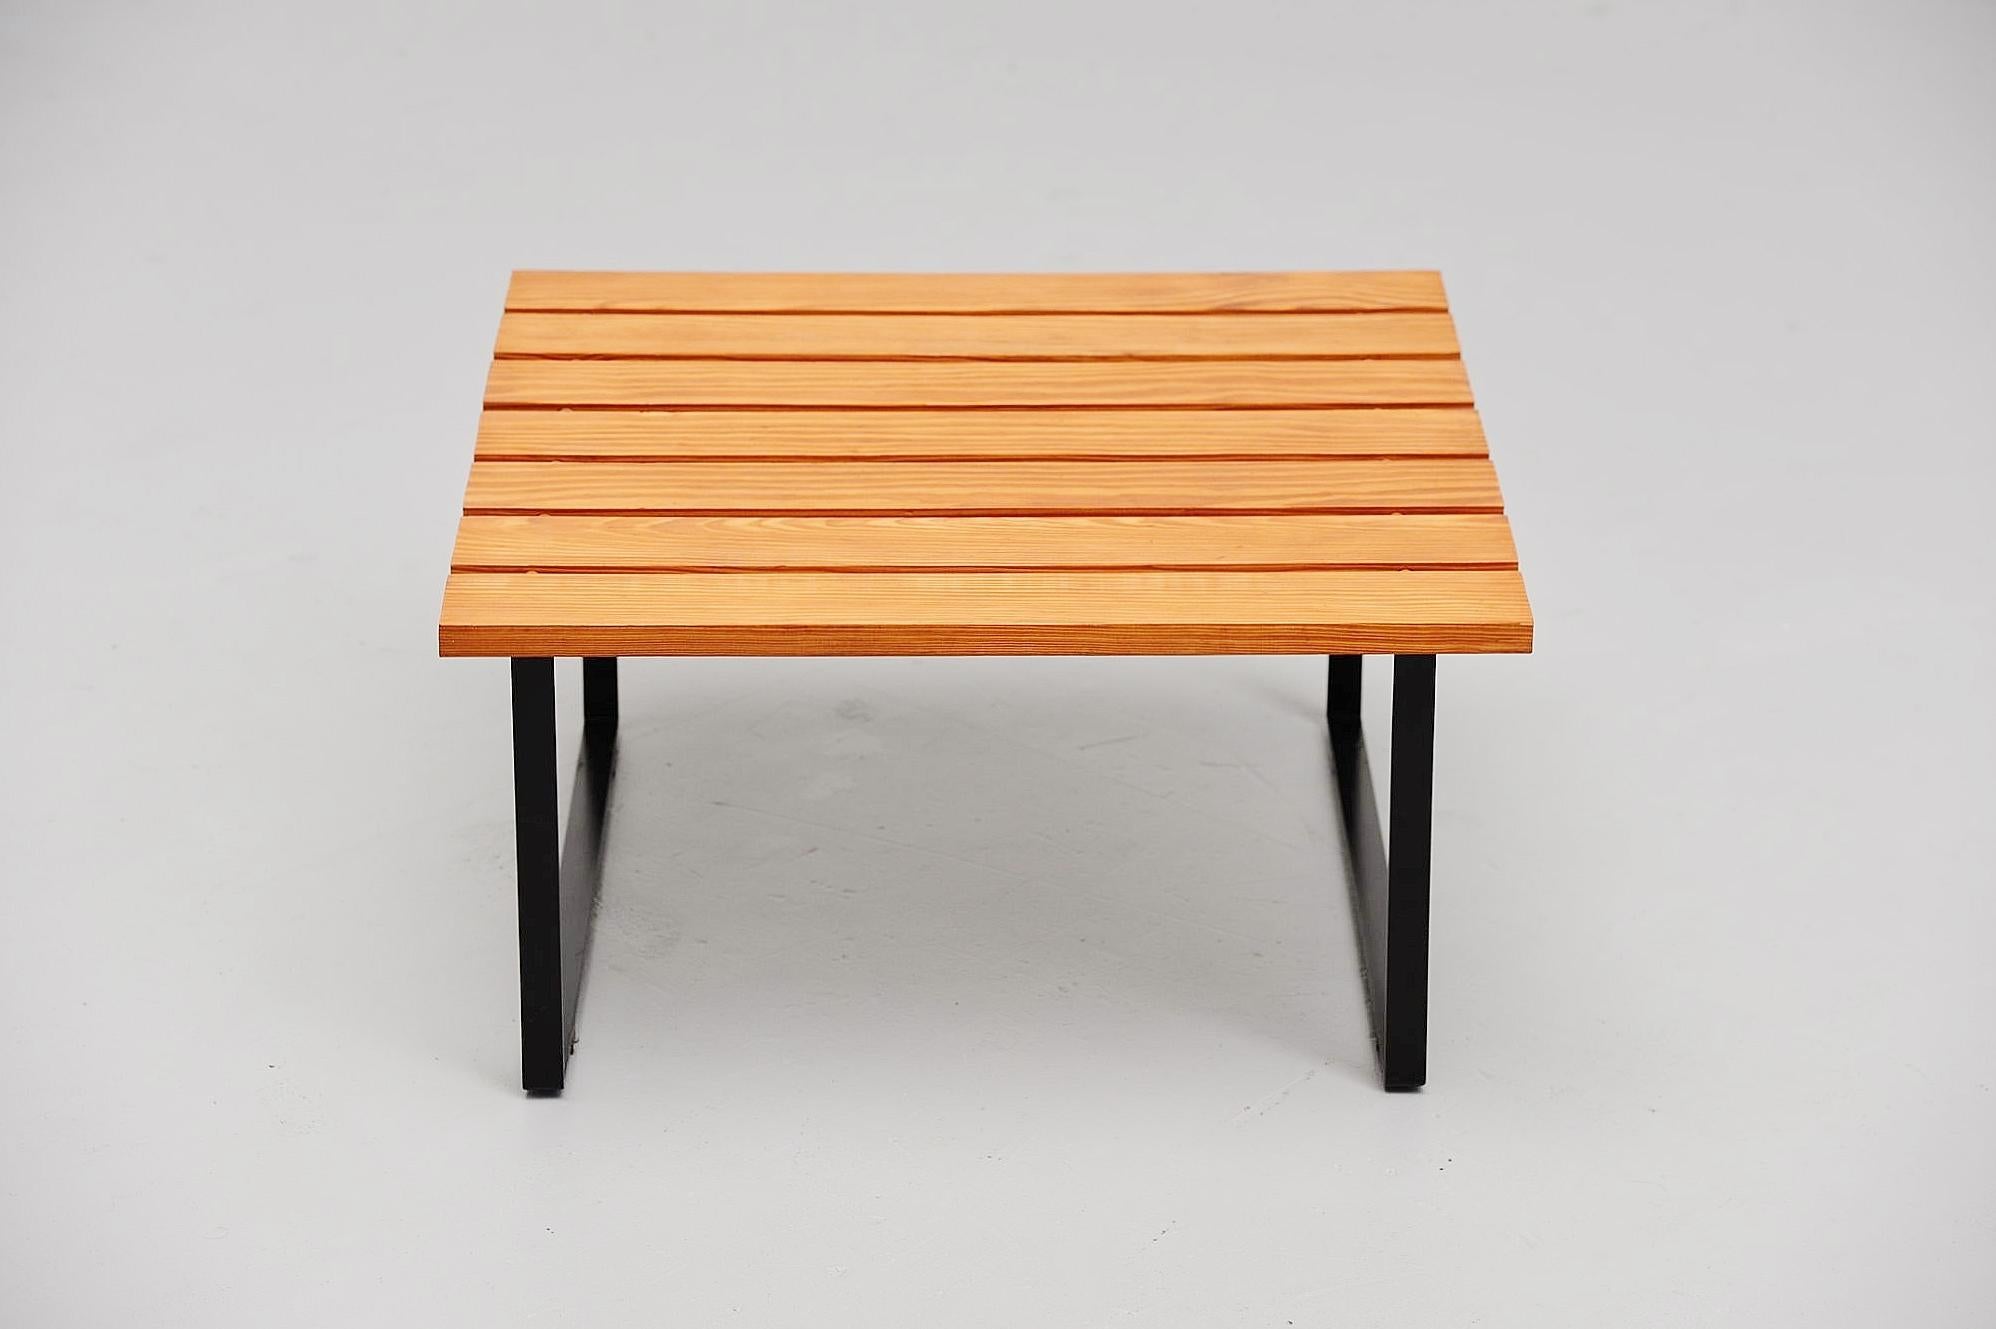 Very nice slat sofa table made and designed by Dutch unknown architect, Holland, 1950. This table has black lacquered sled legs and the top is made of pine wooden slates with dovels to connect. Very nice architectural piece of modernism design. In